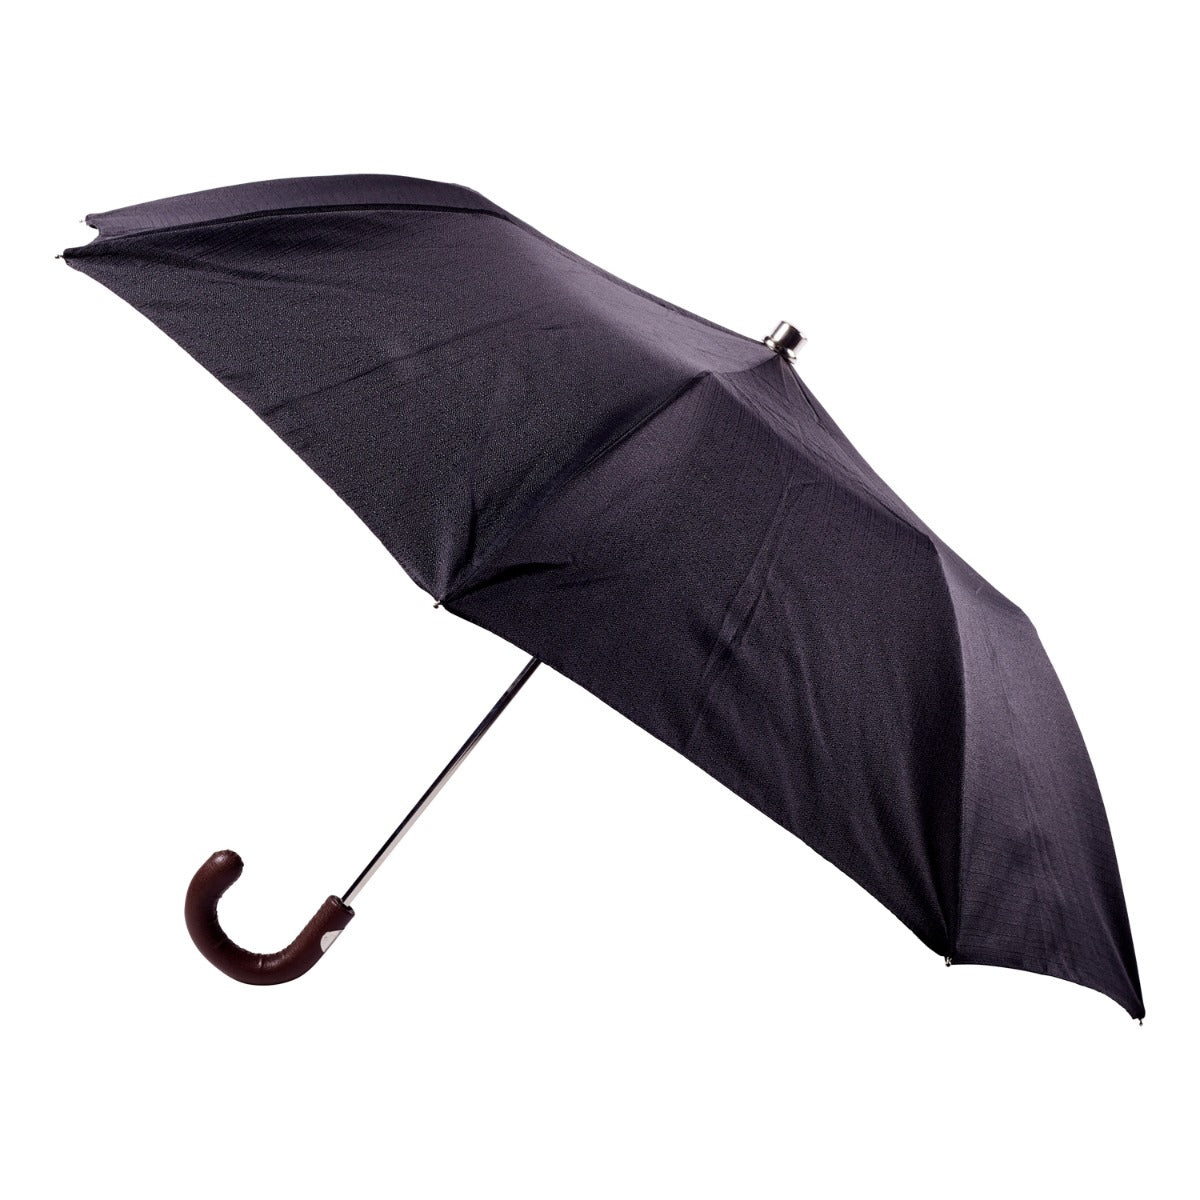 A Brown Pigskin Travel Umbrella with Black Canopy from KirbyAllison.com is open on a white background.